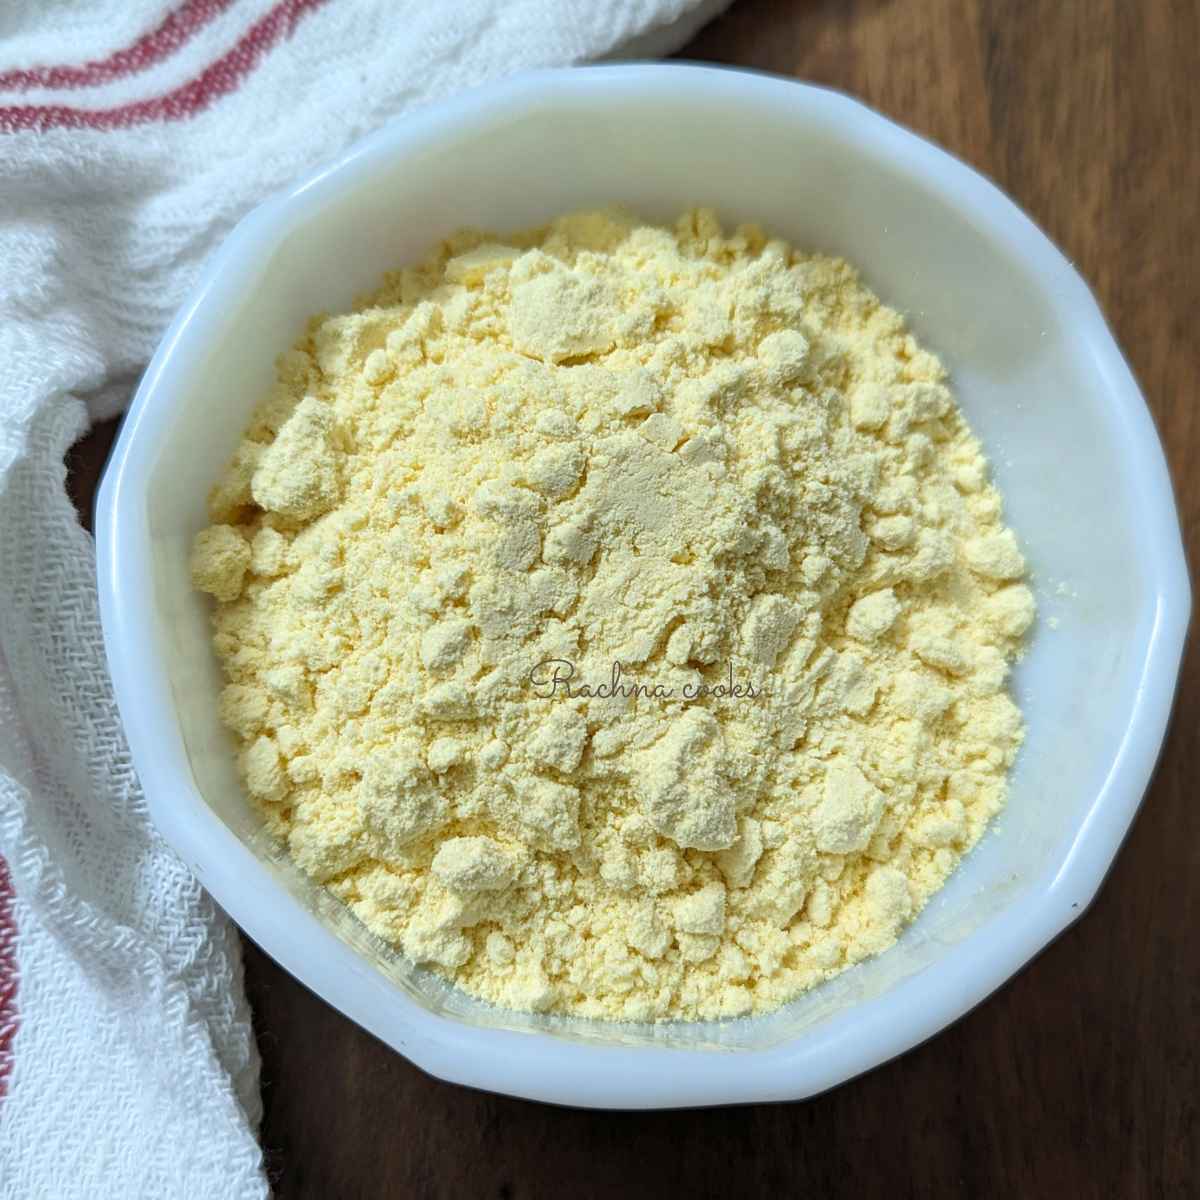 A bowl of chickpea flour